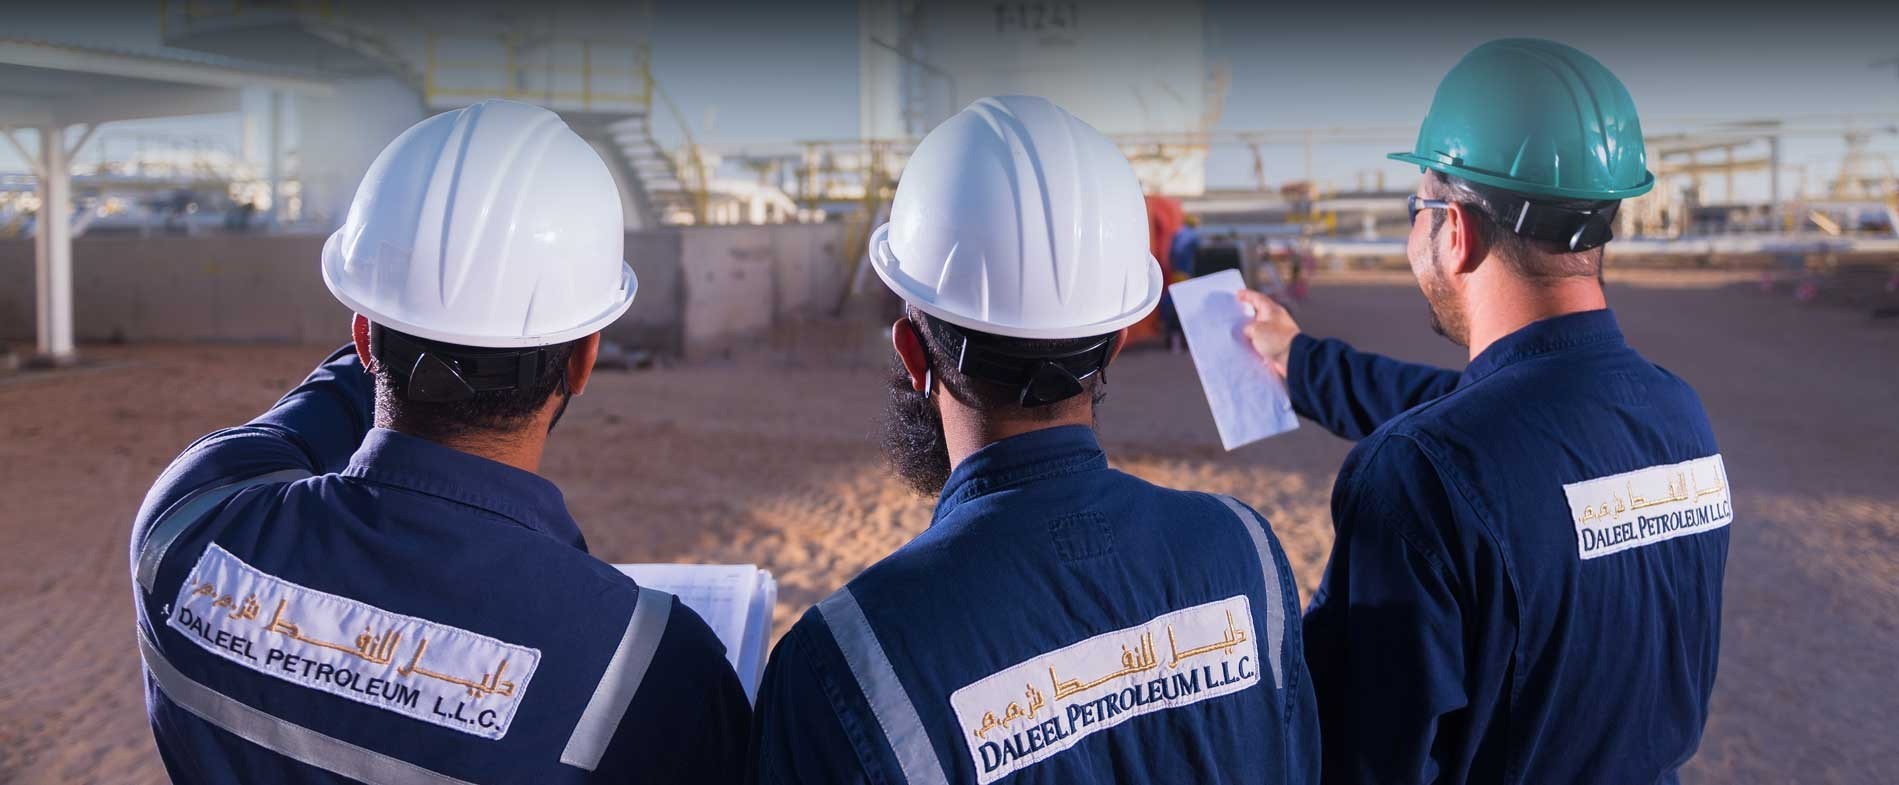 Daleel Petroleum - Safety - ISO Certification